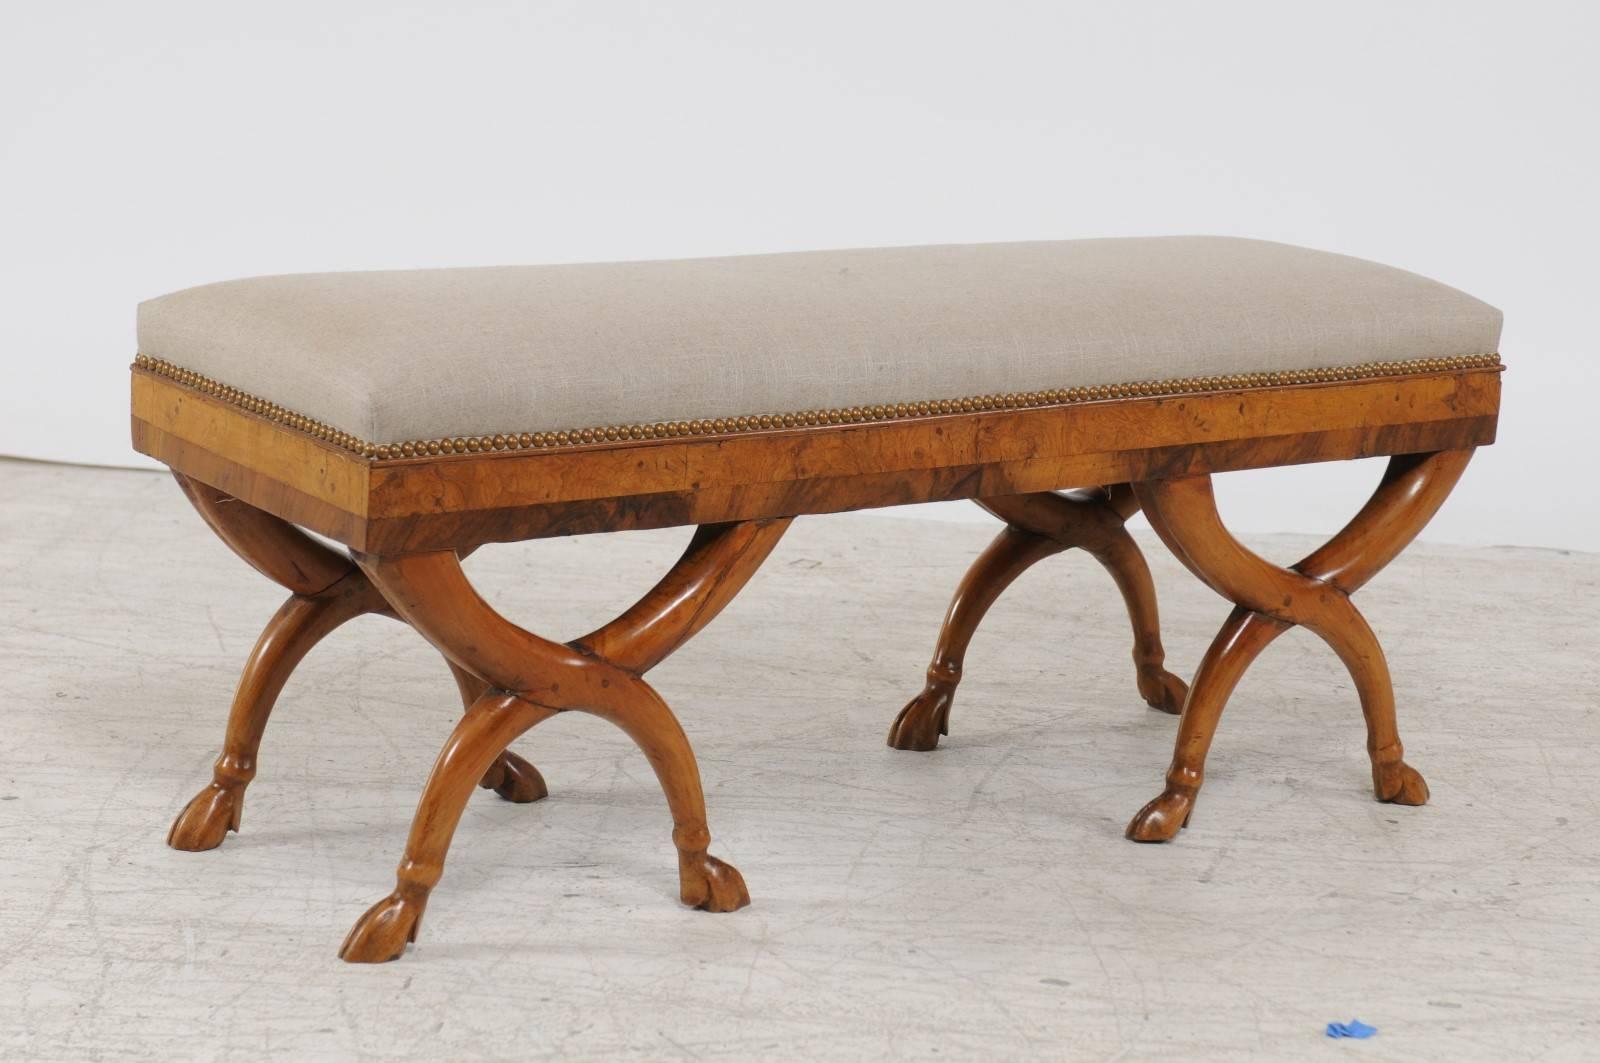 19th Century Austrian Biedermeier 1840s Double X-Form Base Upholstered Bench with Hoofed Feet